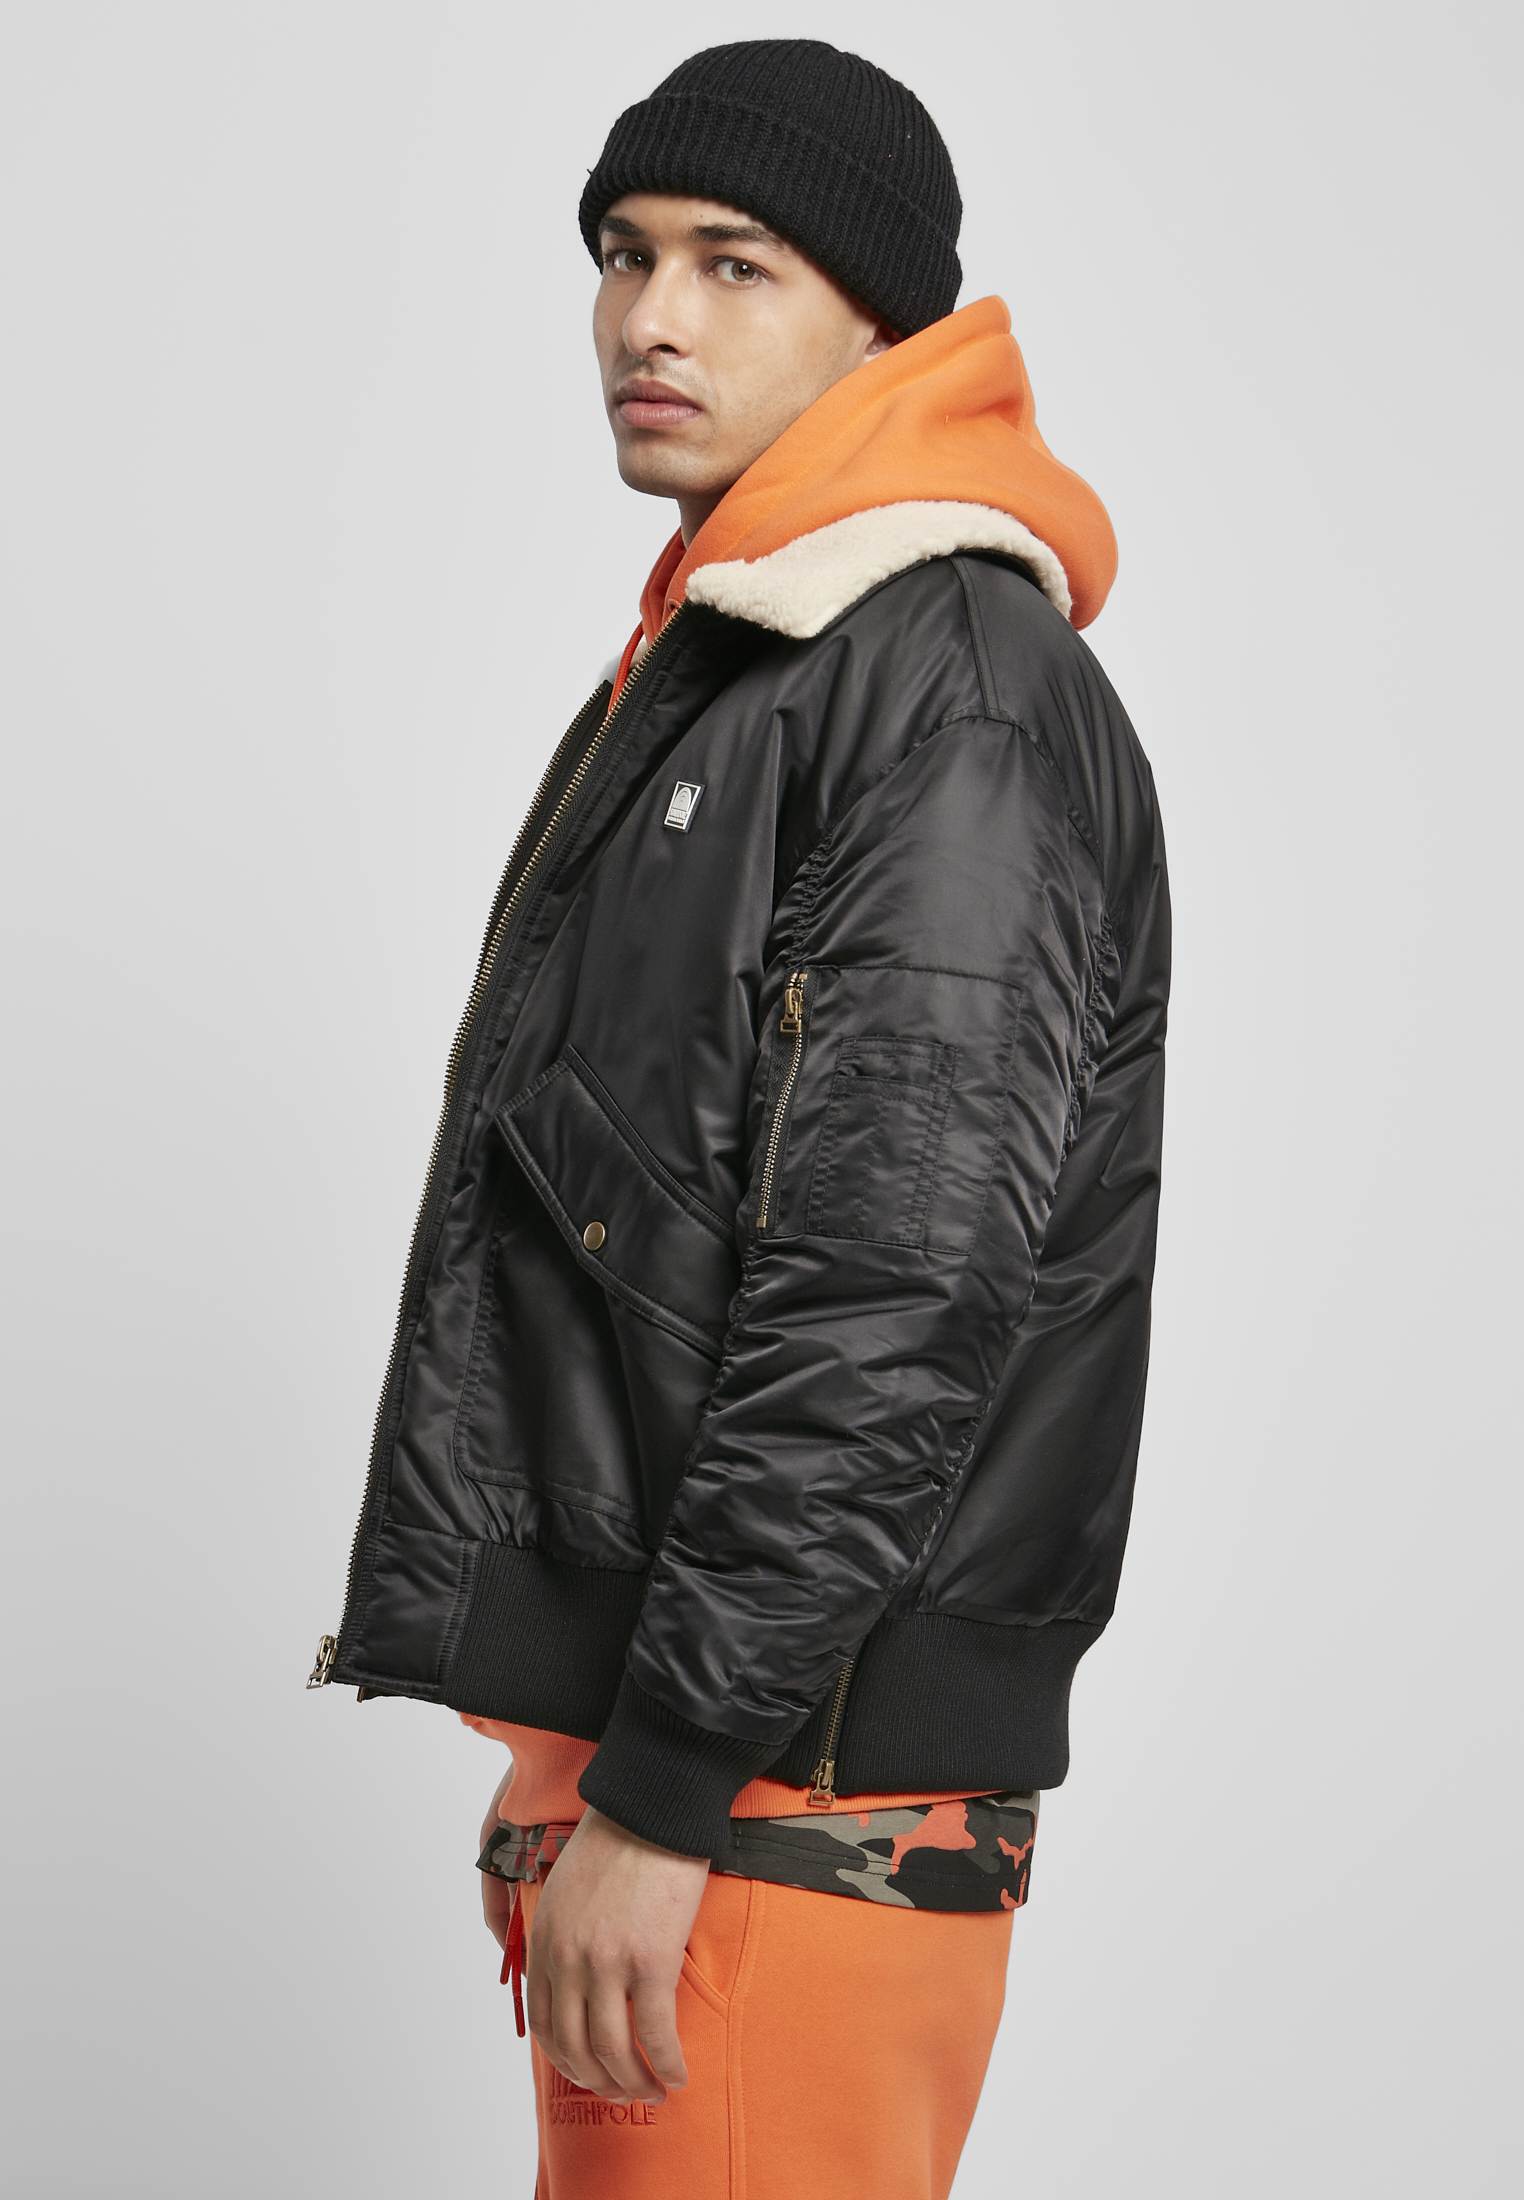 Saisonware Southpole Bomber Jacket in Farbe black